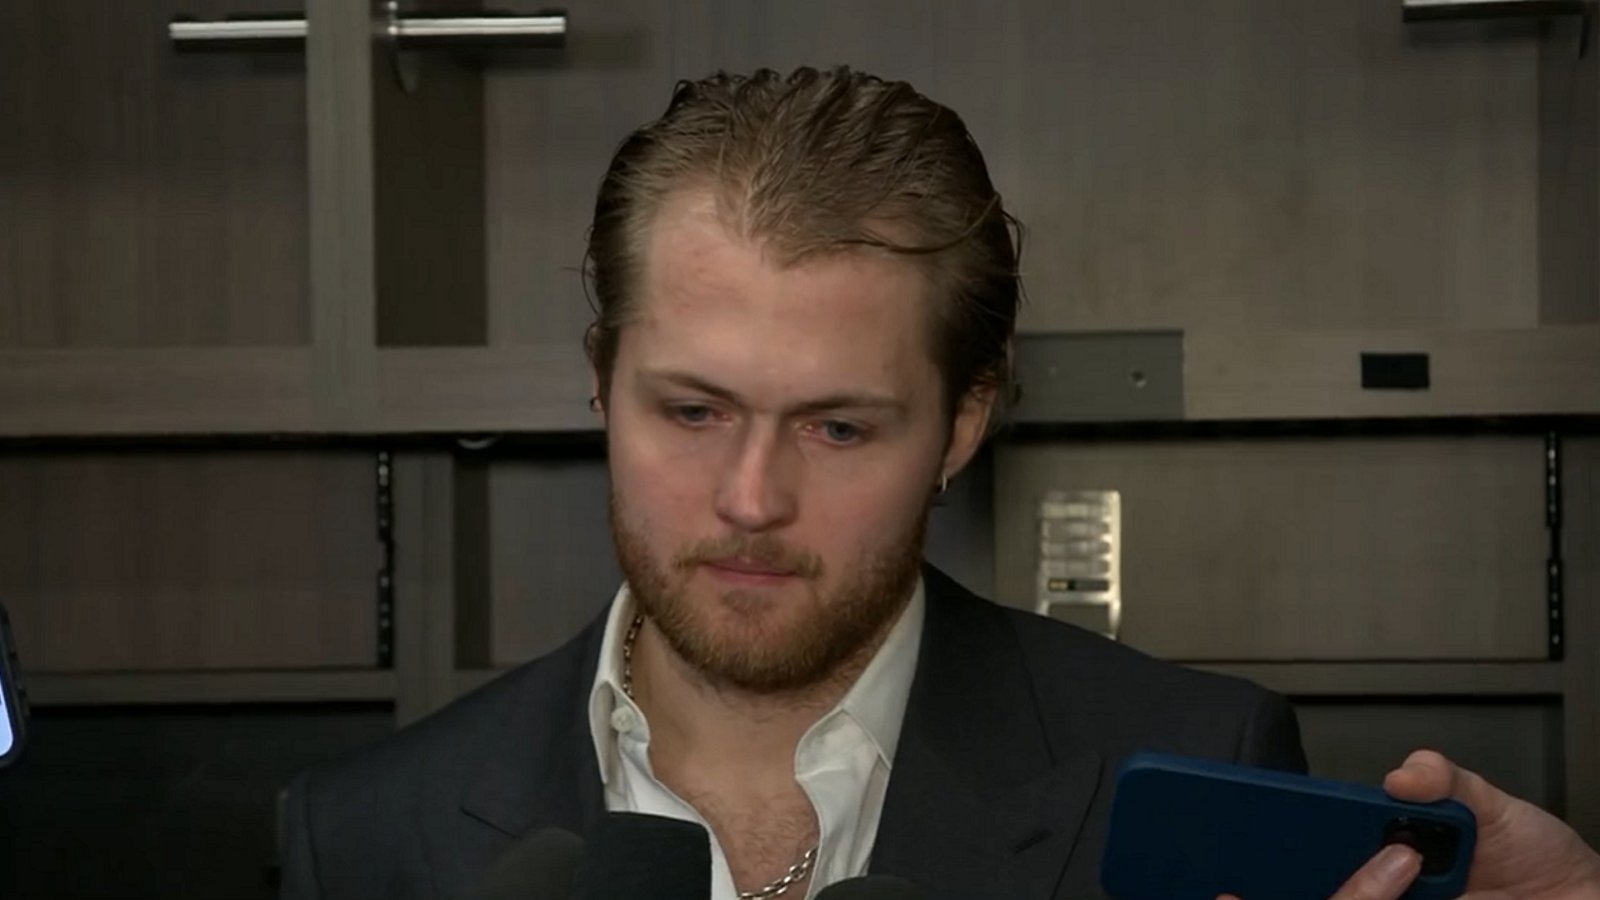 William Nylander shares details about his mysterious injury.